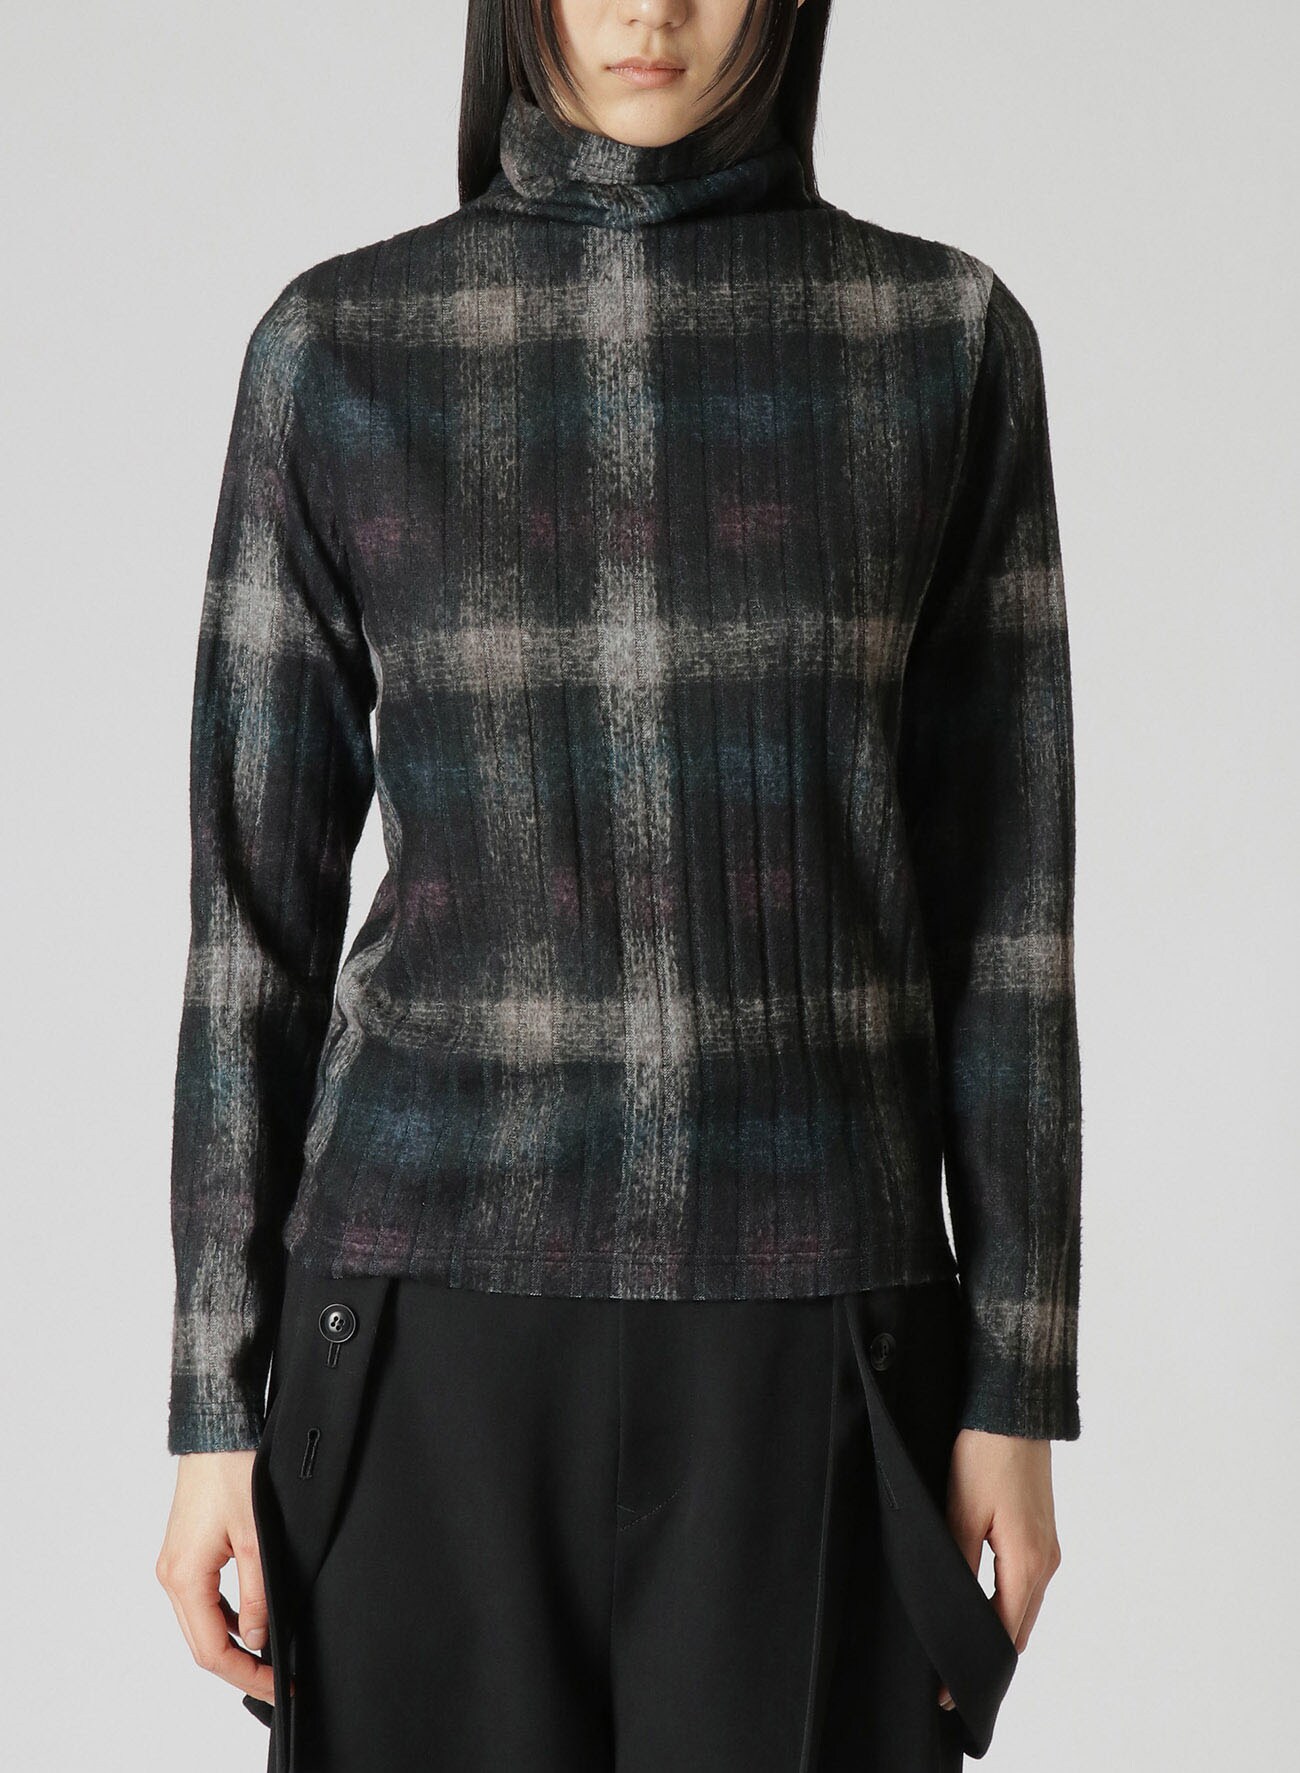 UNEVEN BLURRED CHECK PRINT LONG SLEEVE HIGH NECK T